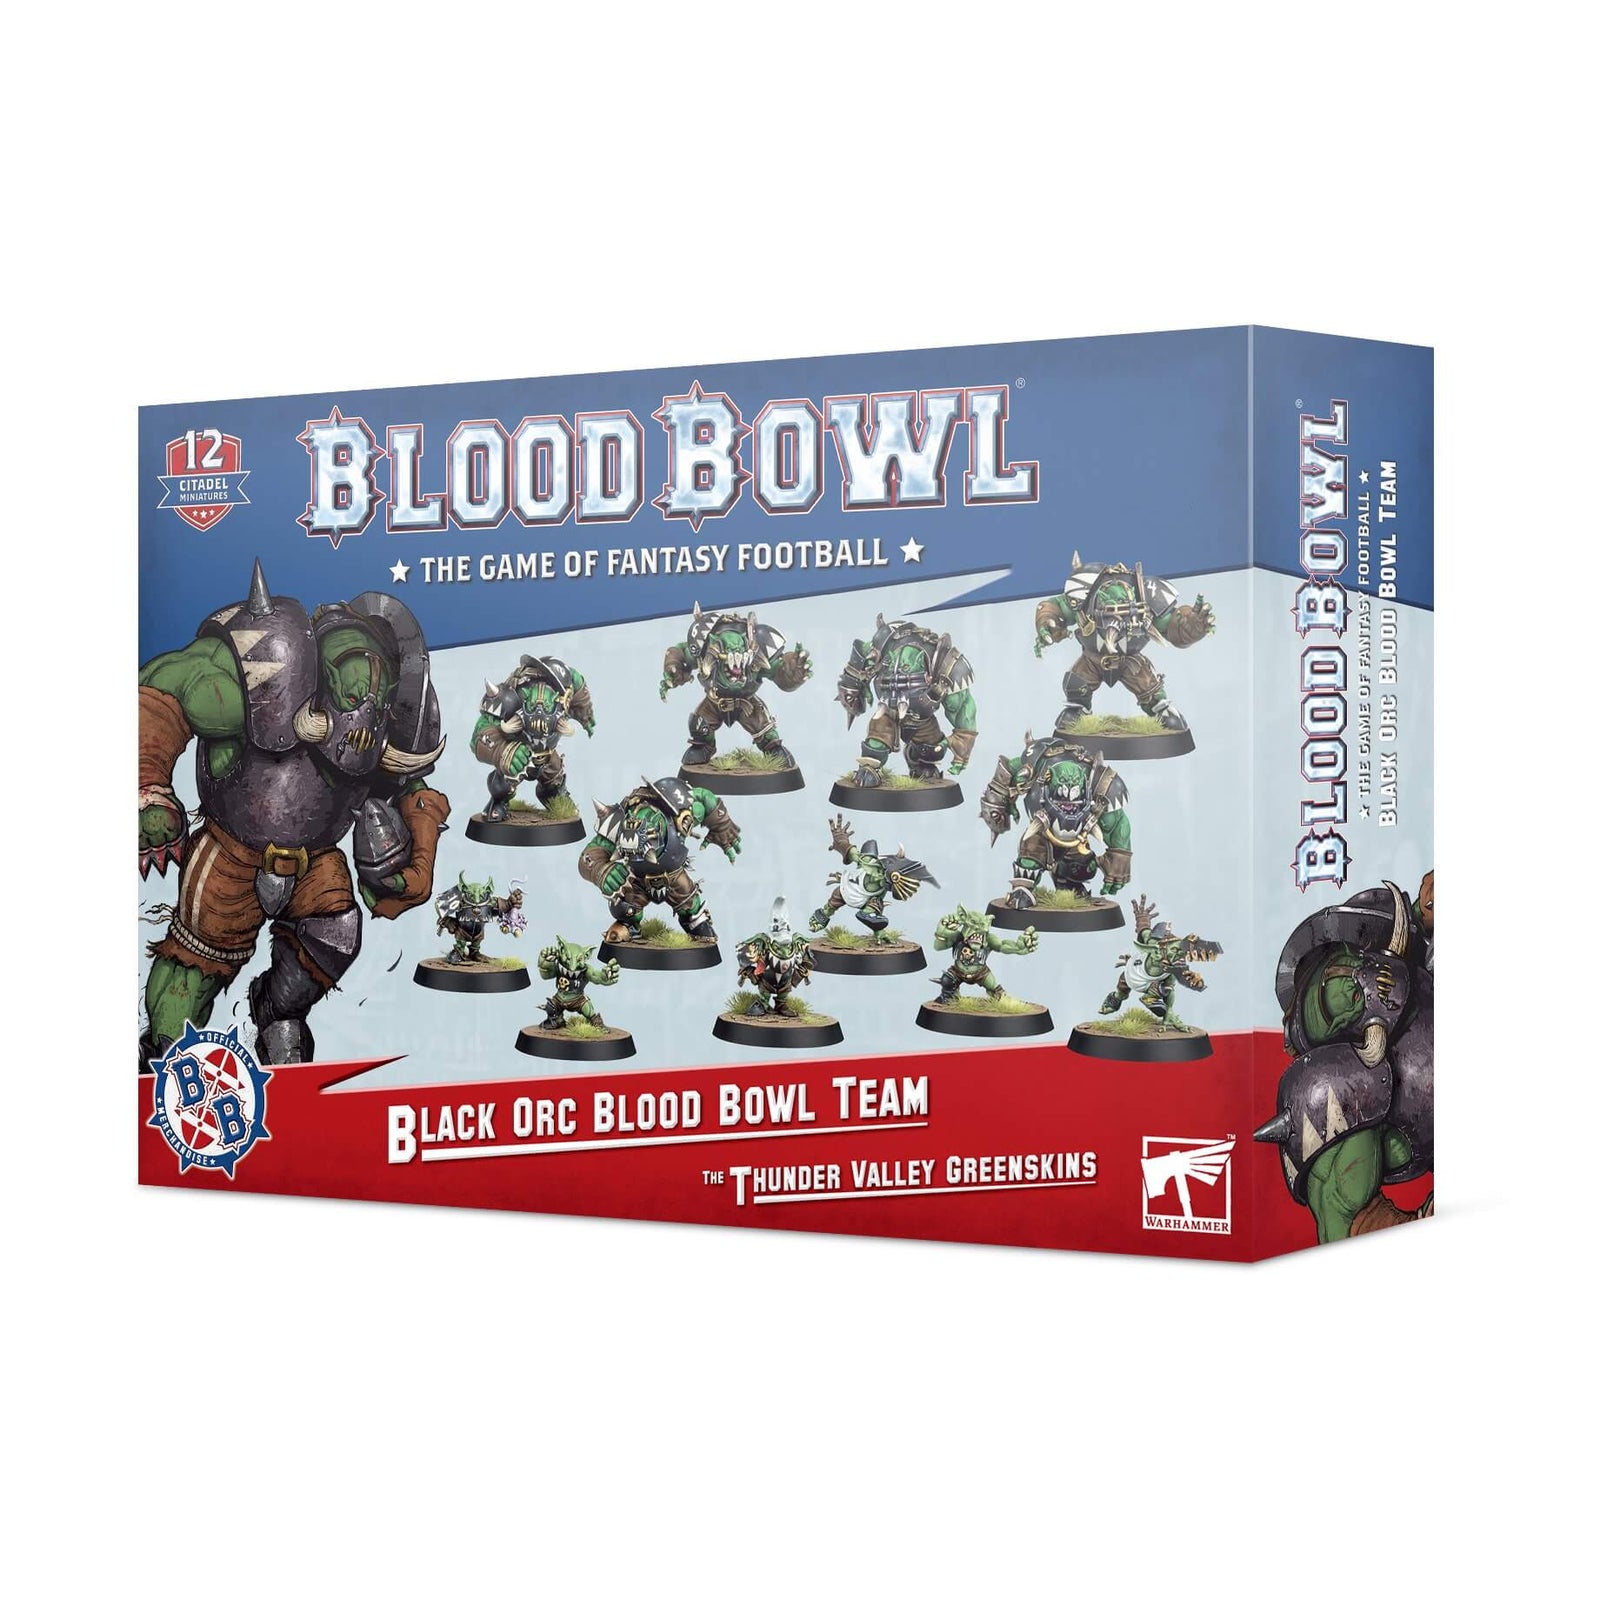 Box image for Black Orc Team